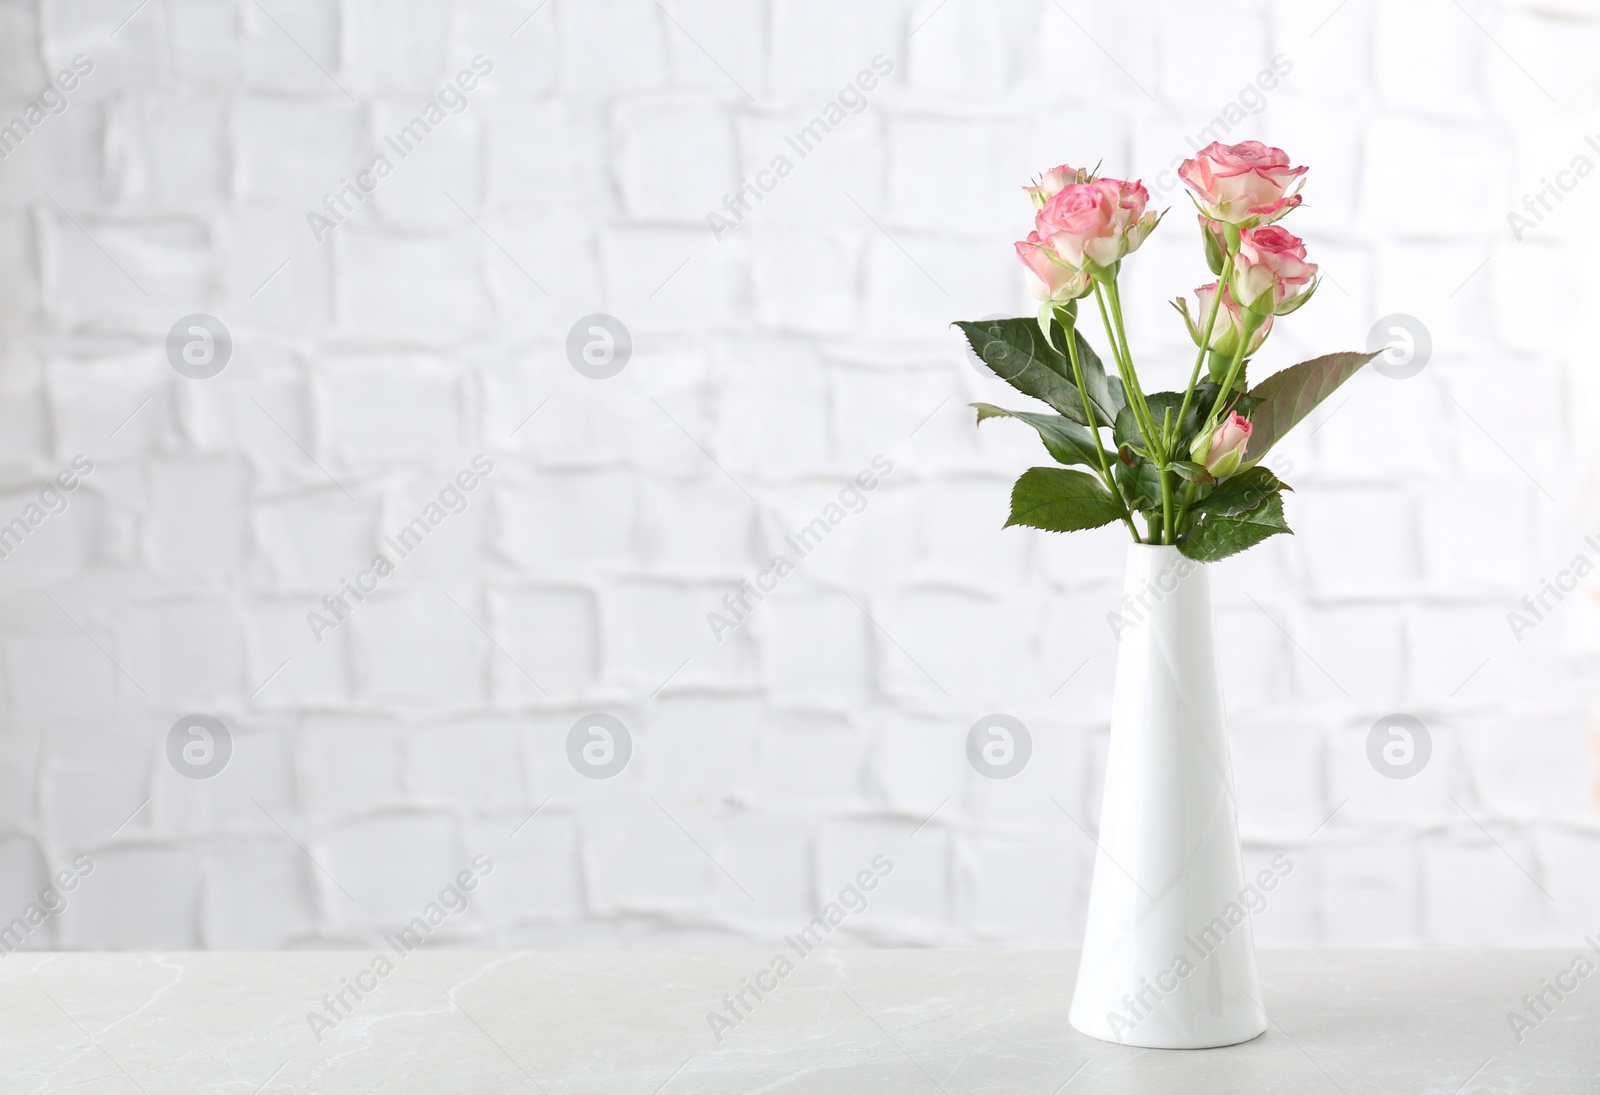 Photo of Vase with beautiful pink roses on white table near brick wall